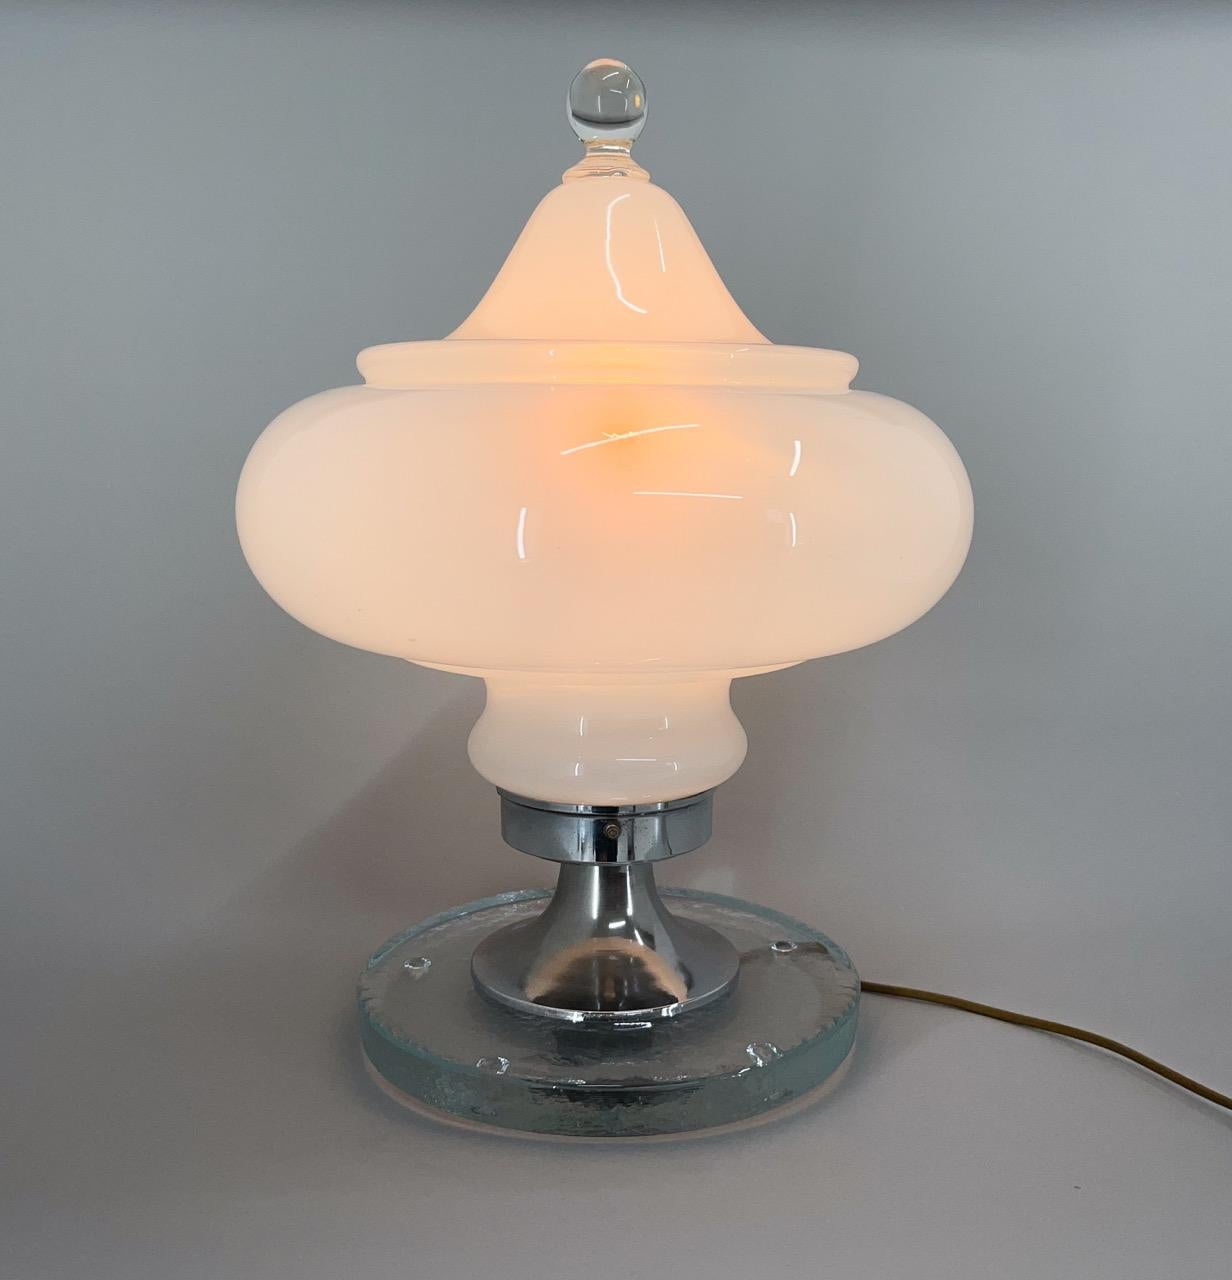 Exeptional vintage piece of lighting from Italy. Made in the 1970's, atributed to designer Carlo Nason for Mazzega.